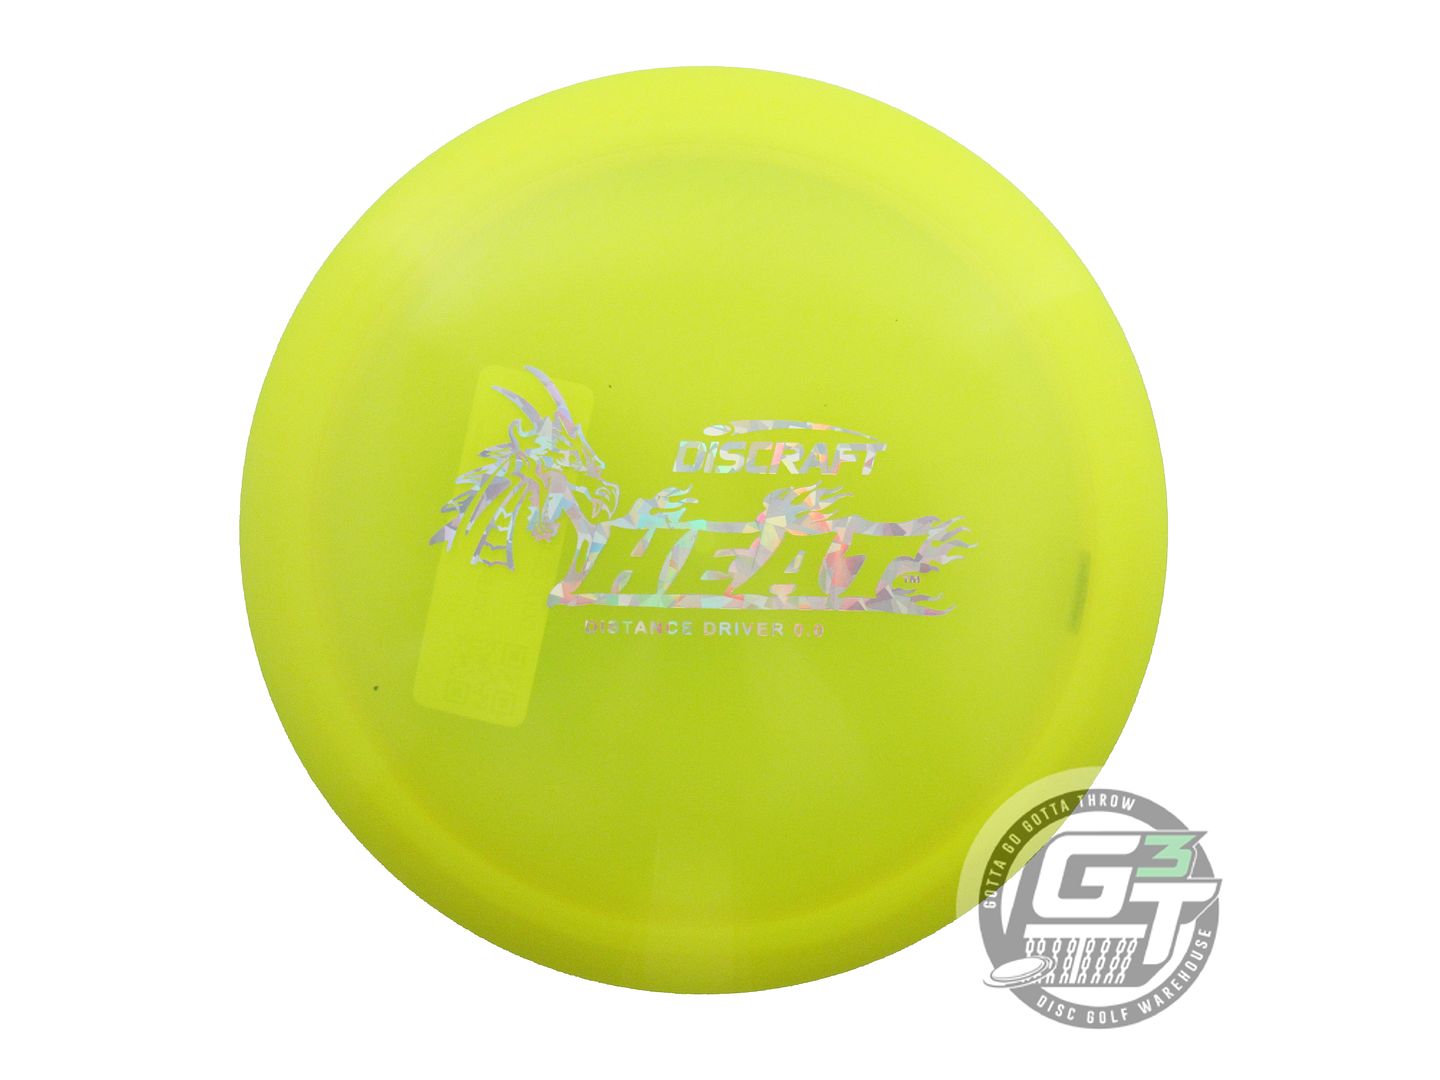 Discraft Limited Edition Old School Pro D Stamp Elite Z Heat Distance Driver Golf Disc (Individually Listed)